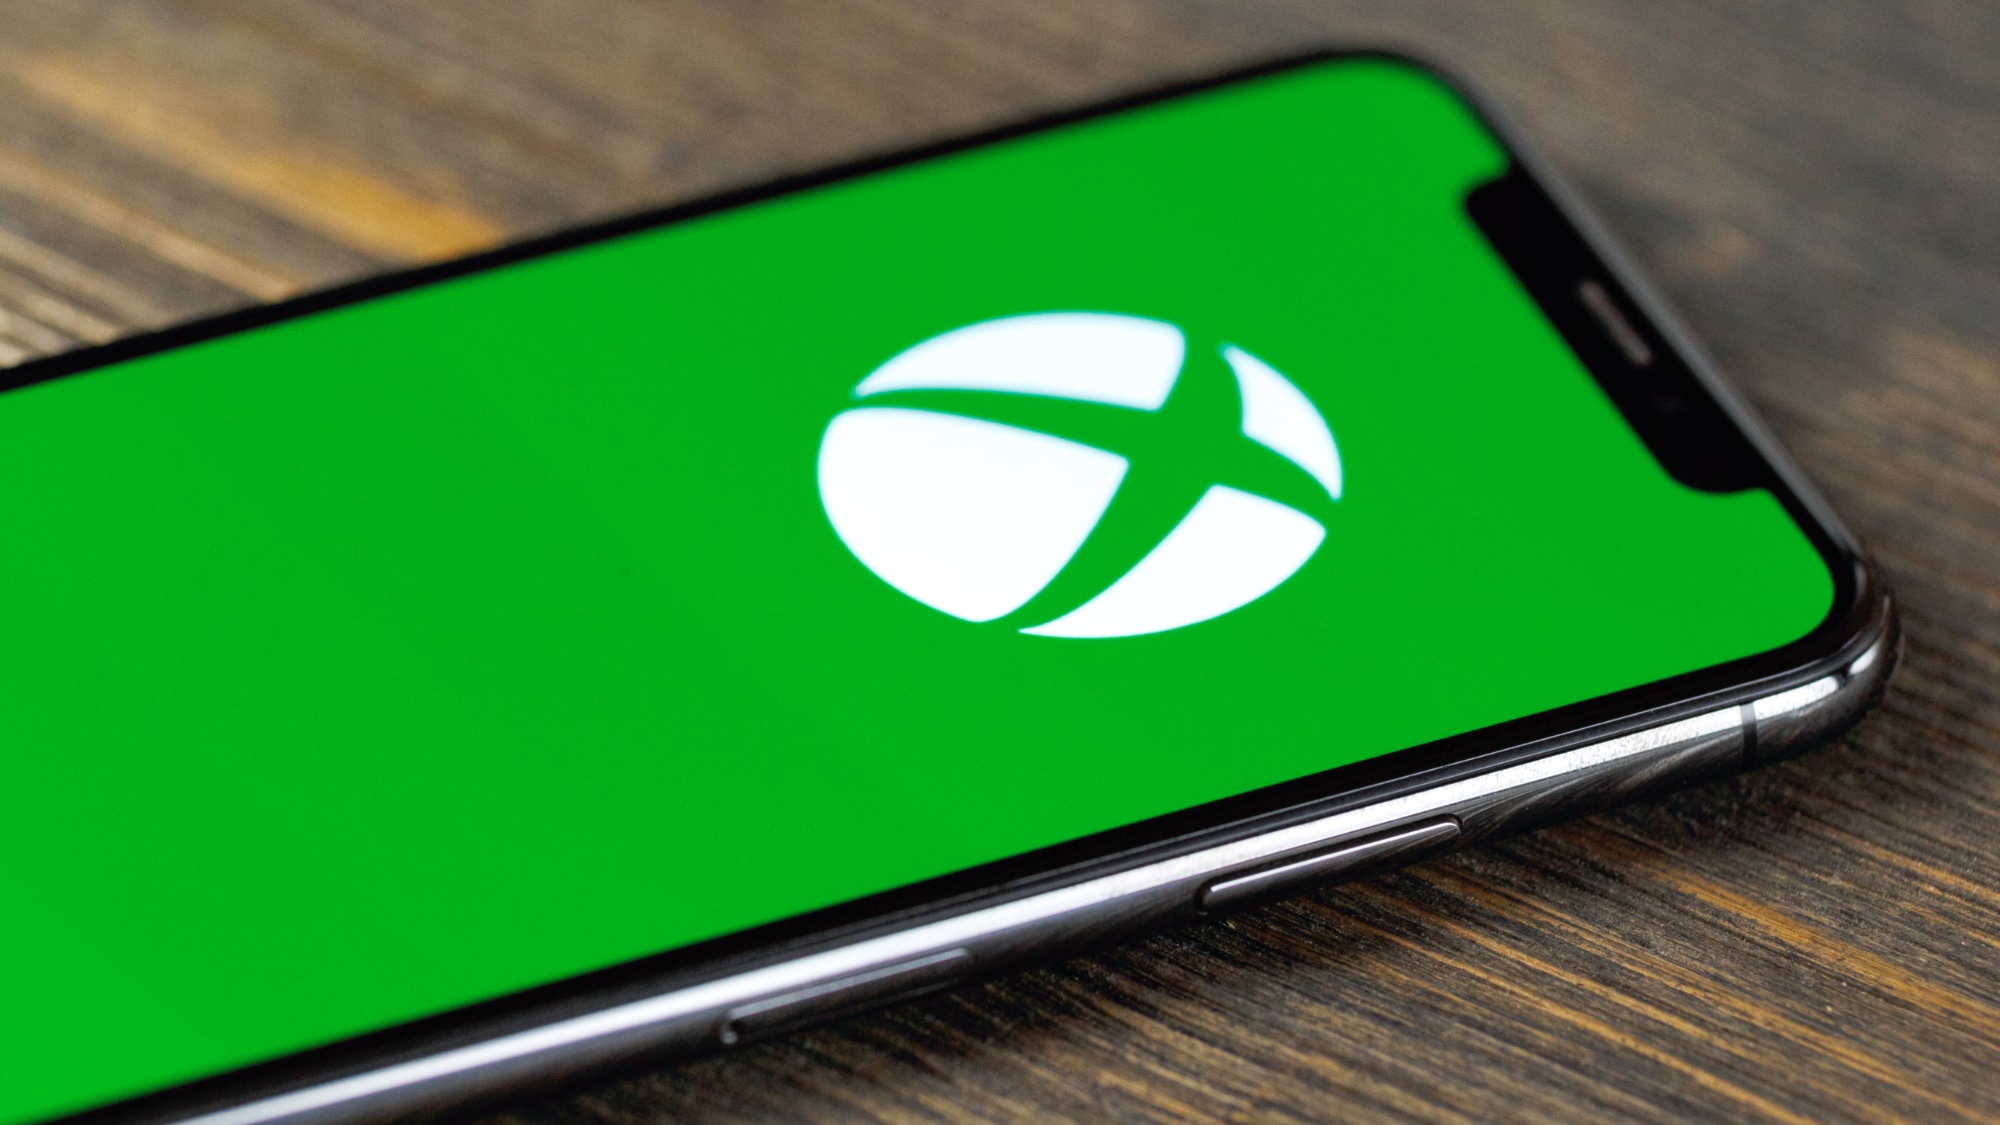 Microsoft working on Xbox mobile store, to rival Play Store and